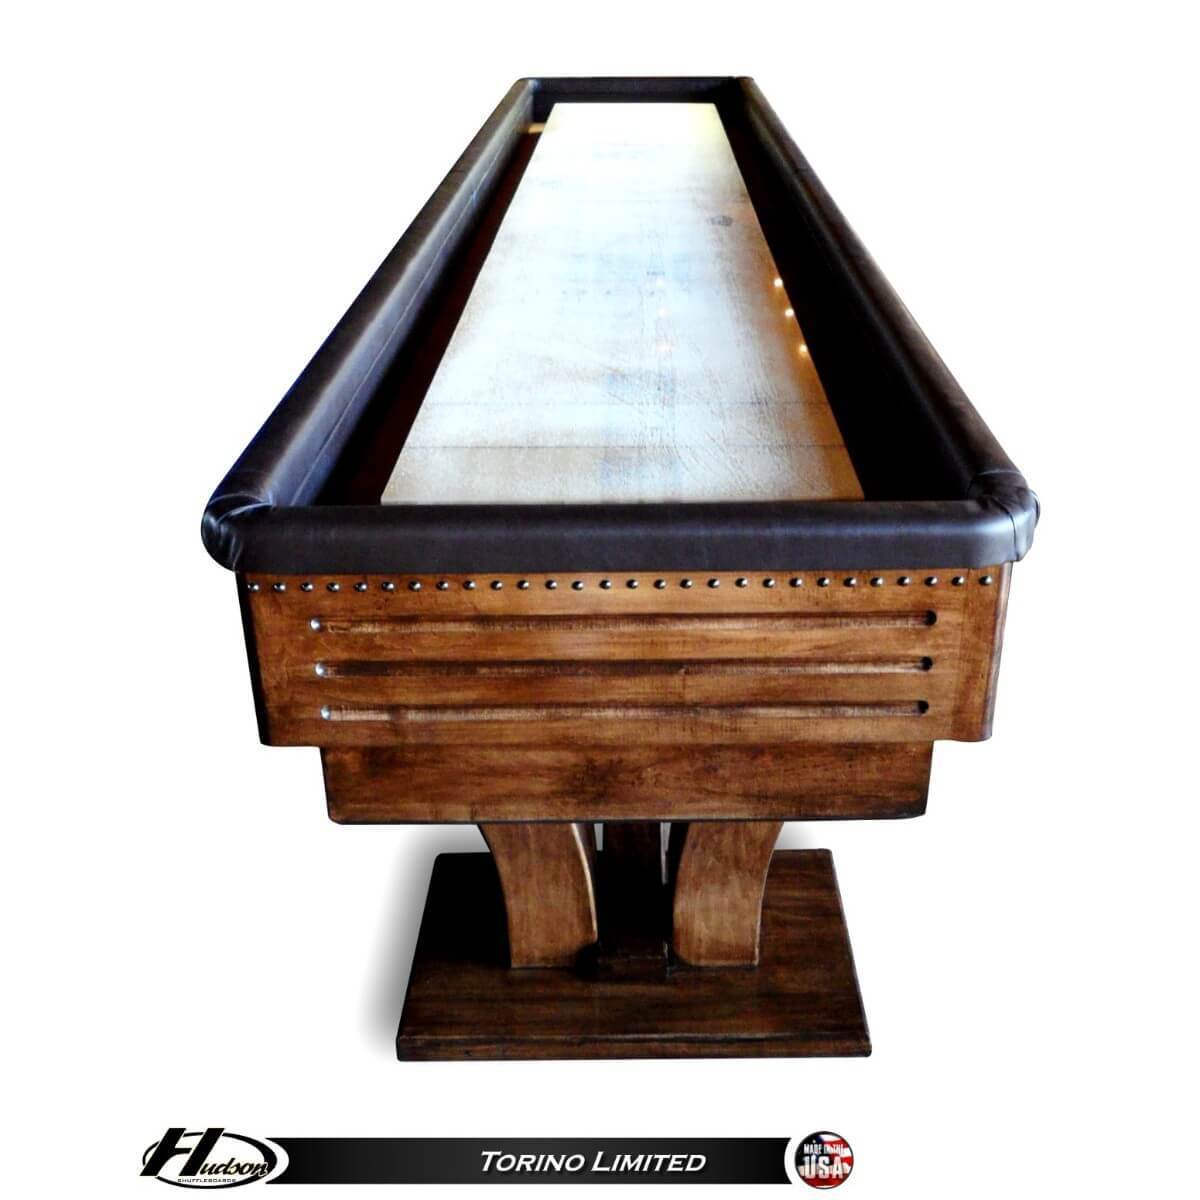 Hudson Torino Limited Edition Shuffleboard Table 9'-22' with Custom Stain Options - Gaming Blaze